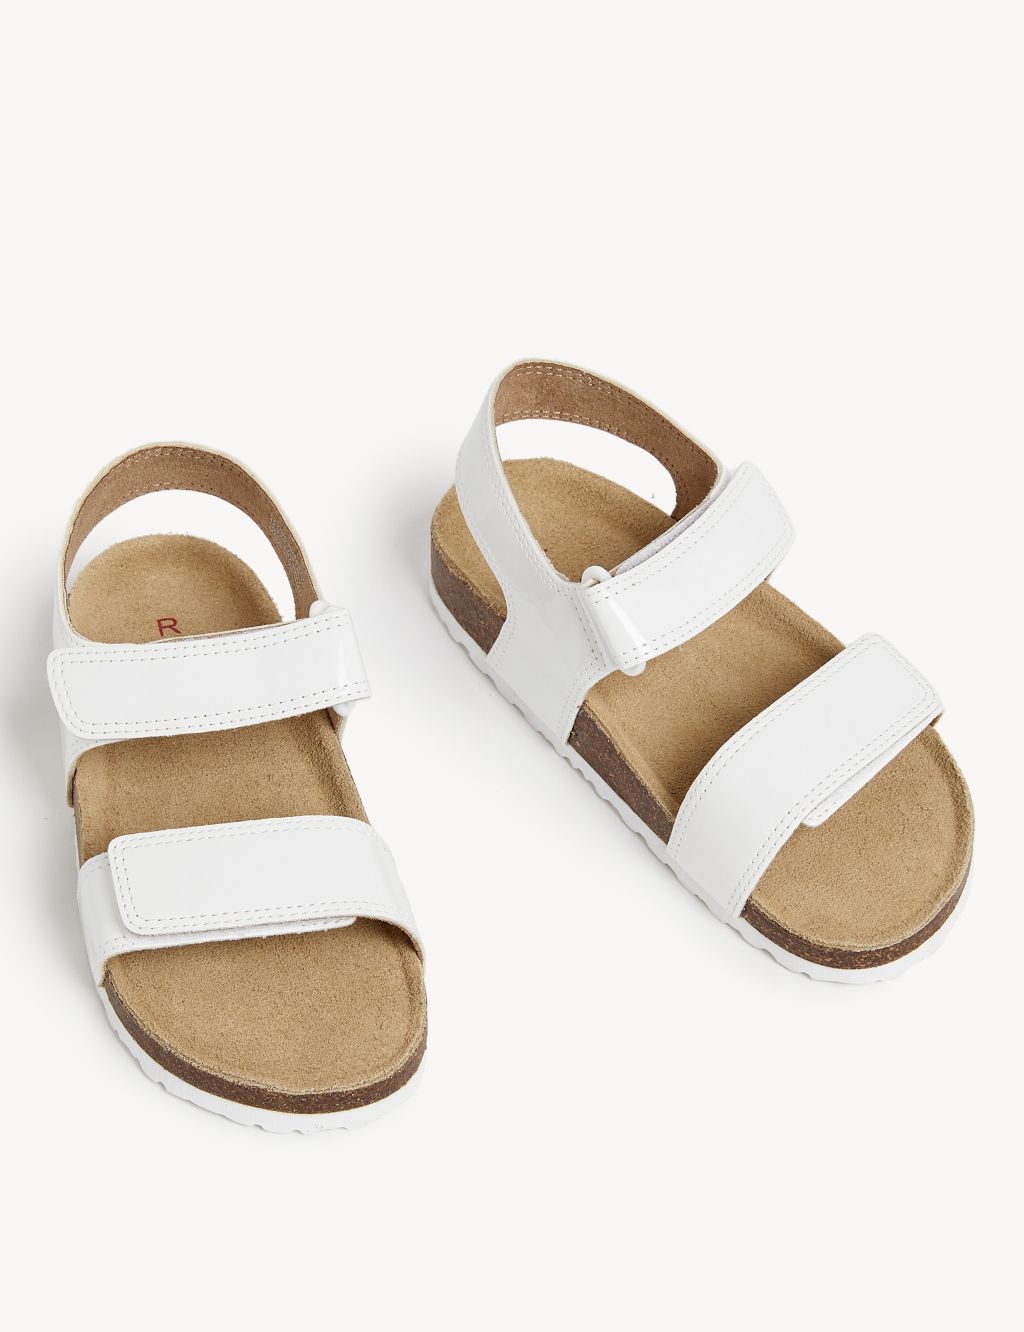 Kids' Riptape Footbed Sandals (4 Small - 13 Small) image 2